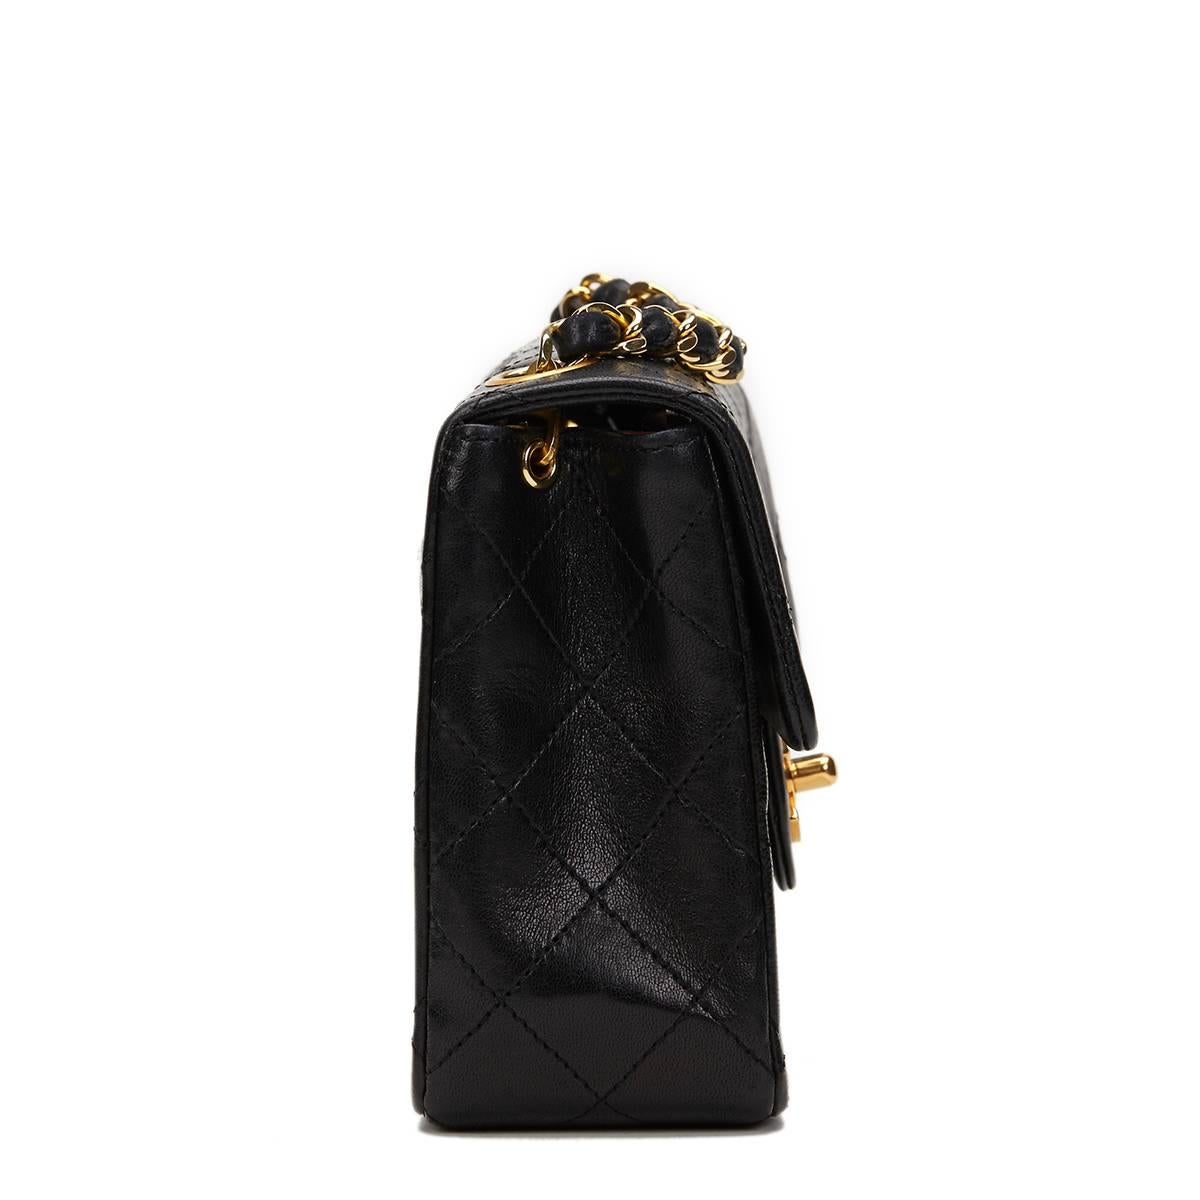 CHANEL
Black Quilted Lambskin Vintage Mini Flap Bag

This CHANEL Mini Flap Bag is in Excellent Pre-Owned Condition accompanied by Chanel Dust Bag. Circa 1987. Primarily made from Lambskin Leather complimented by Gold hardware. Our  reference is